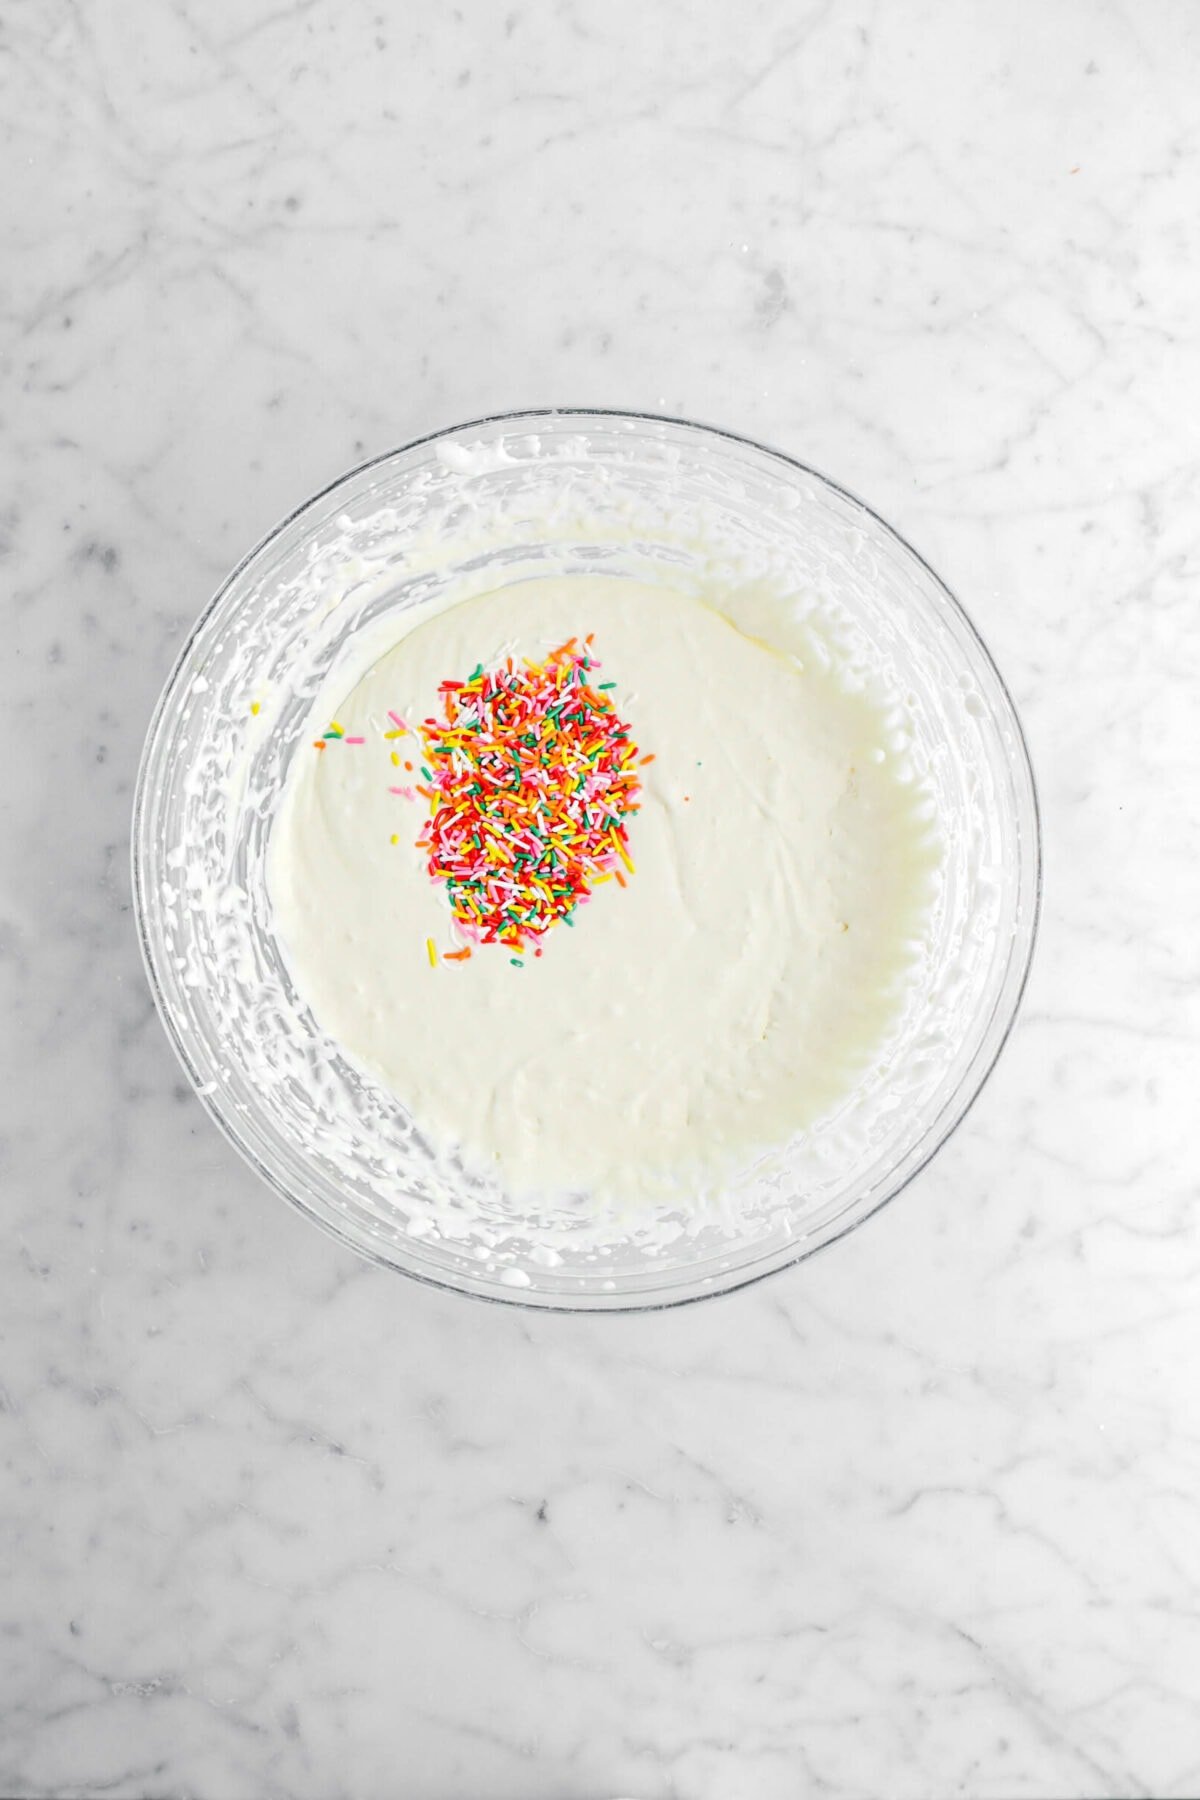 sprinkles added to ice cream base.